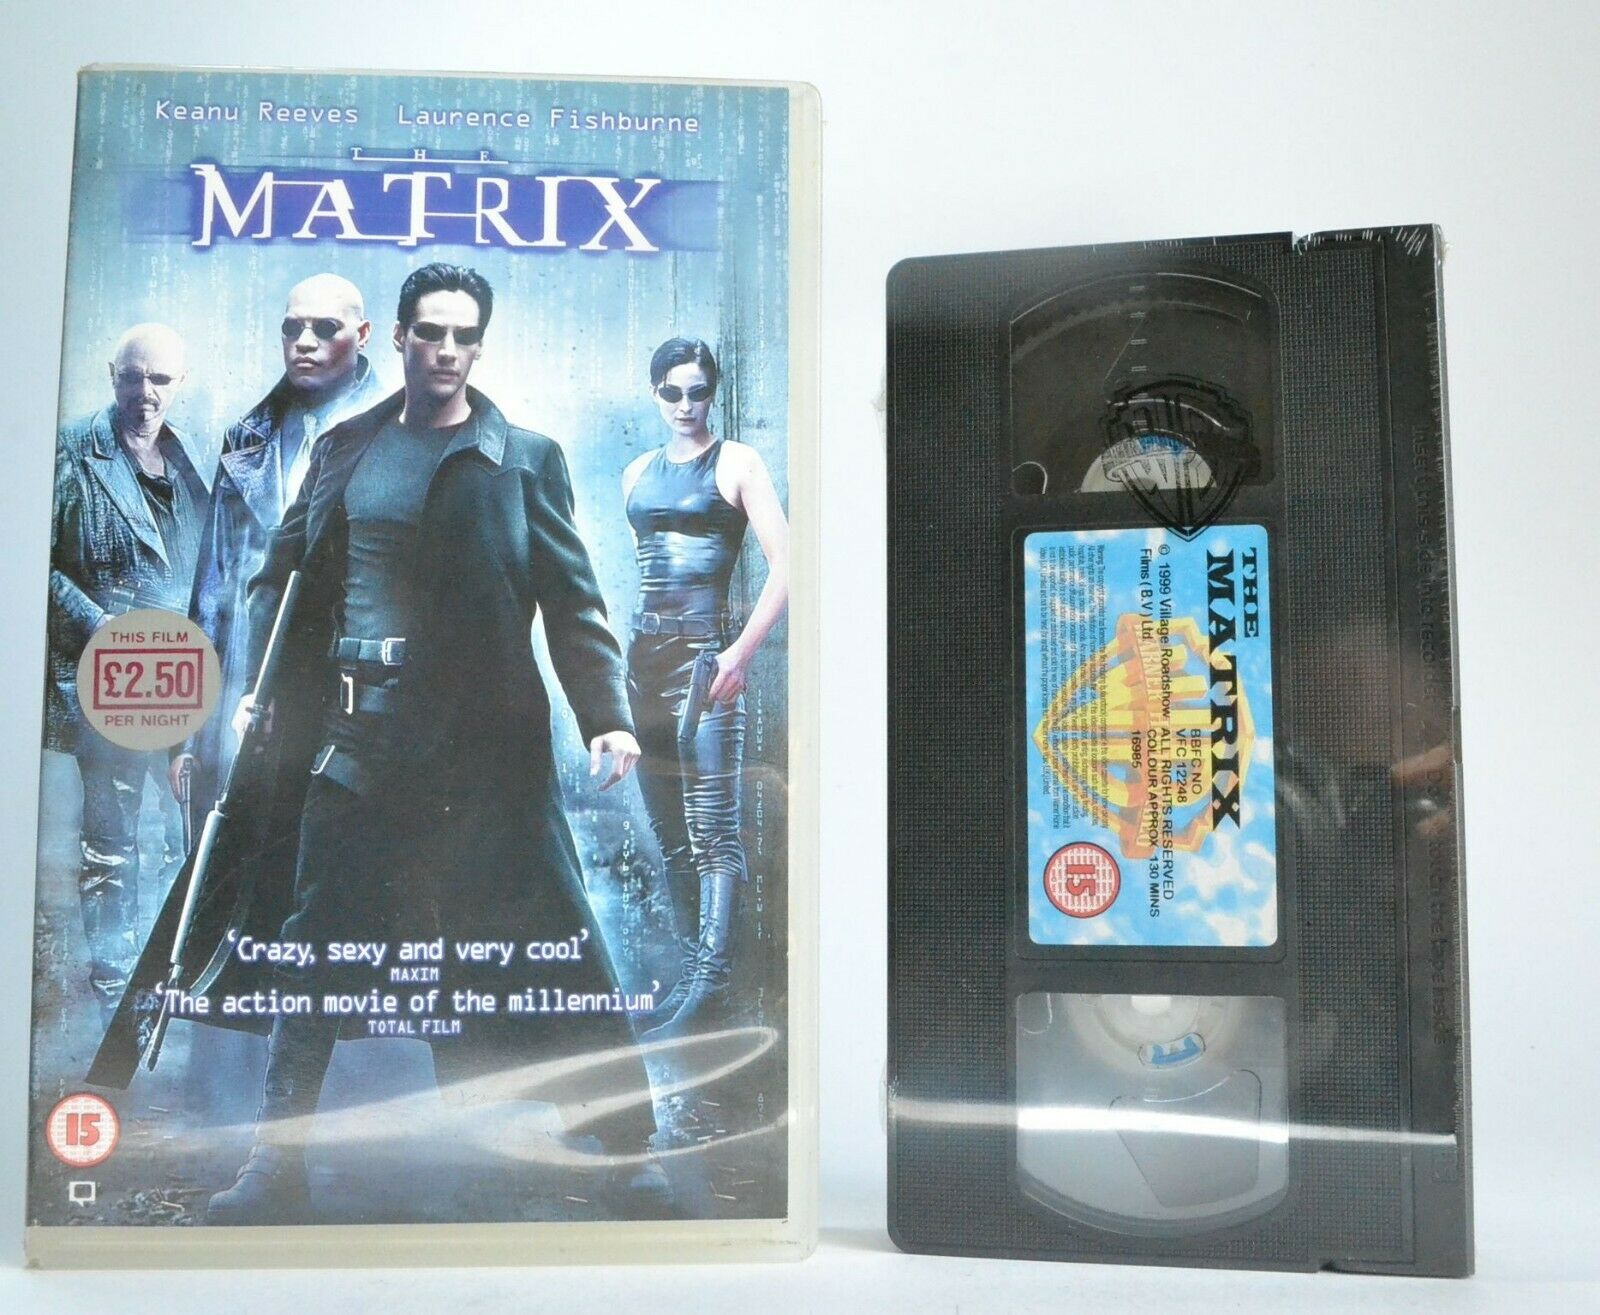 The Matrix (1999) - [Brand New Sealed] - Sci-Fi Action - Keanu Reeves - Pal VHS-